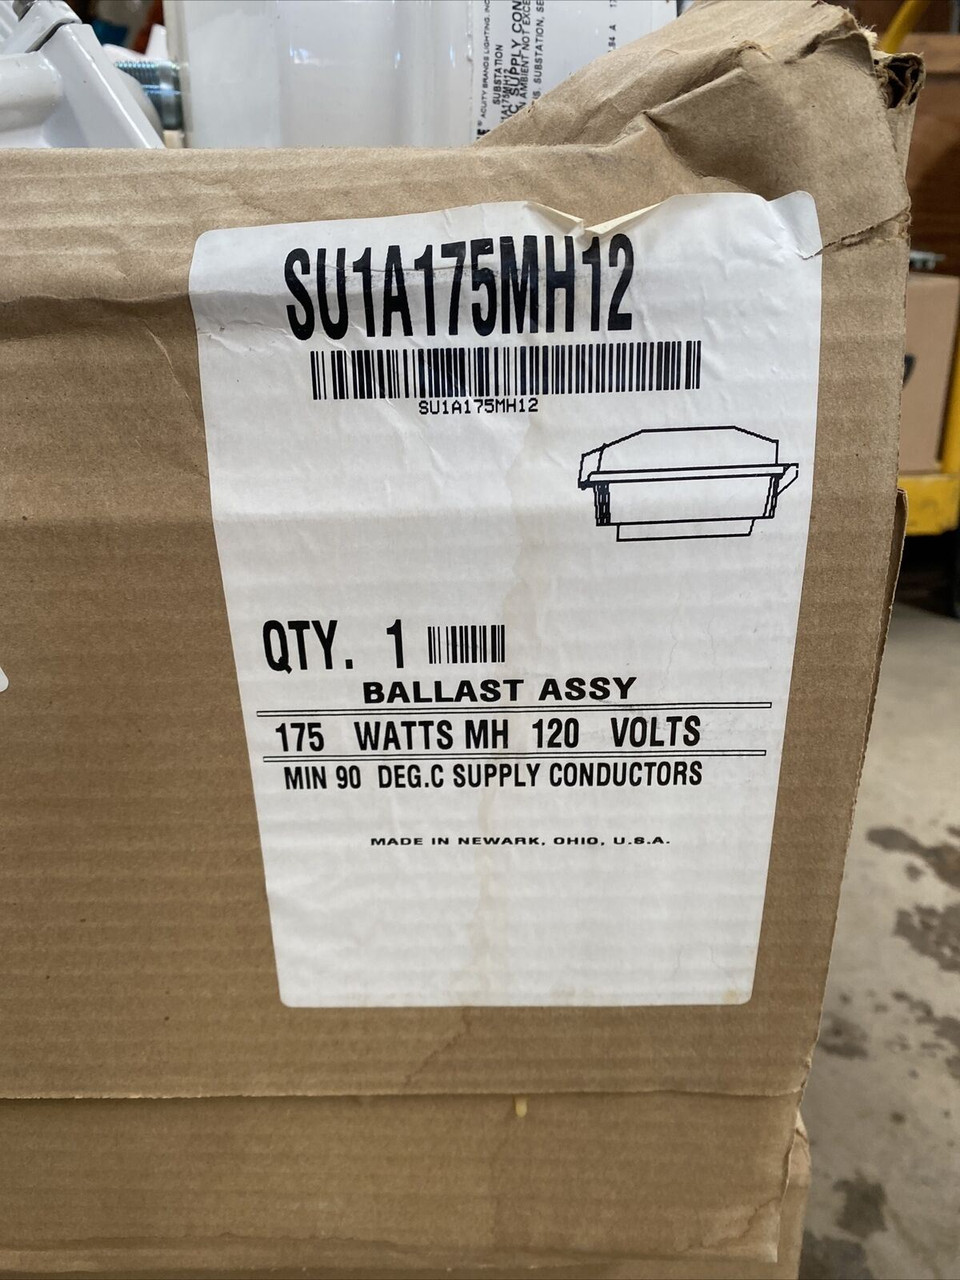 Holophane Ballast Assembly SU1A175MH12 Acuity Brands Lighting 175W 120V